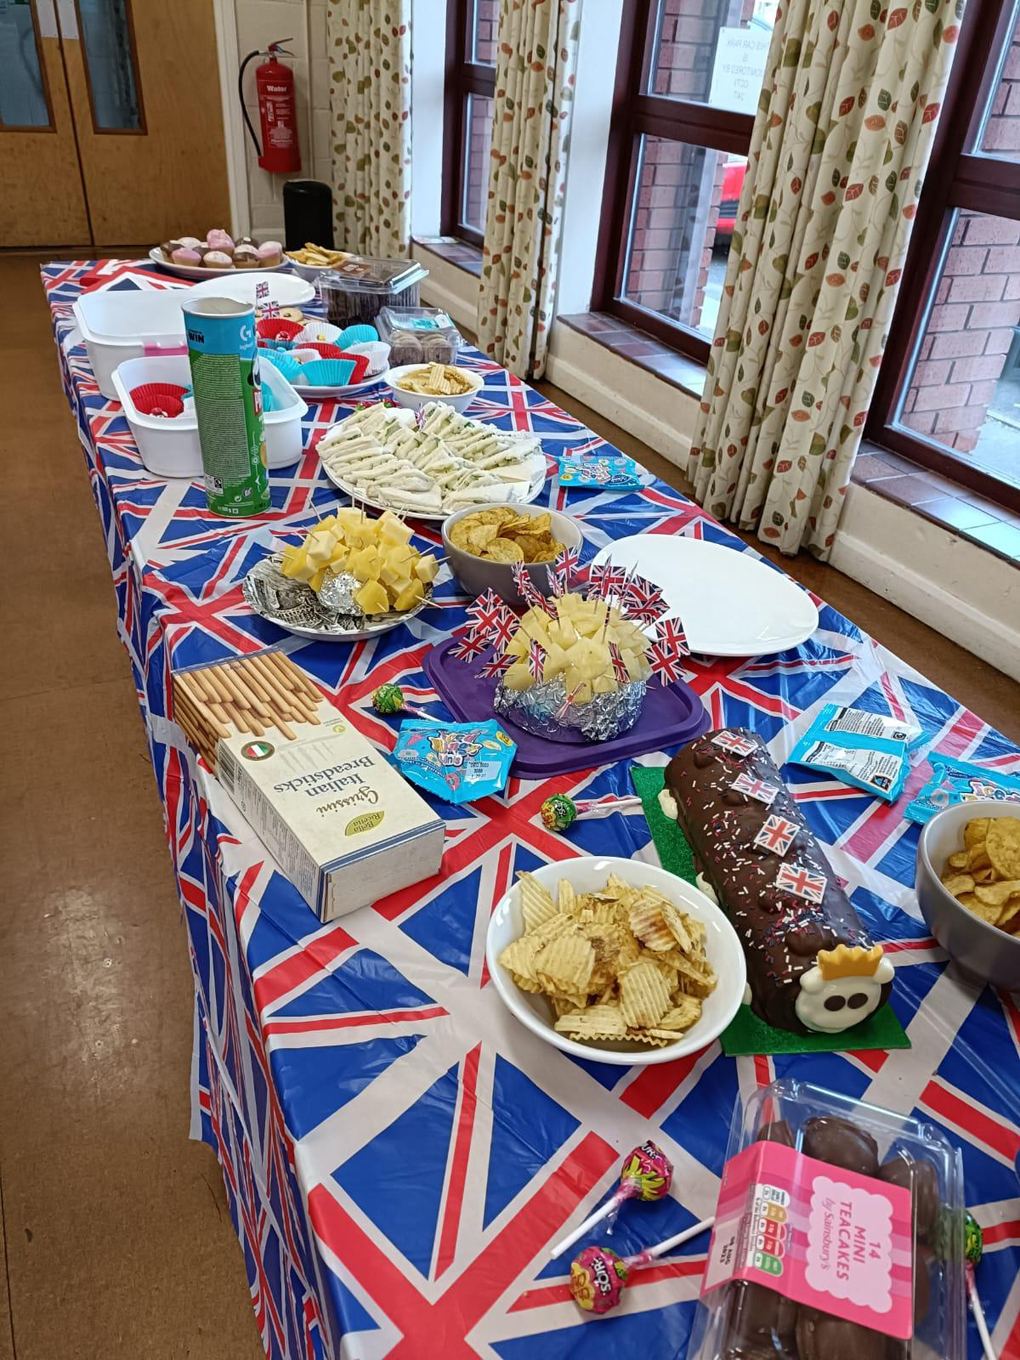 Table covered in coronation-themed food with a Union Jack tablecloth